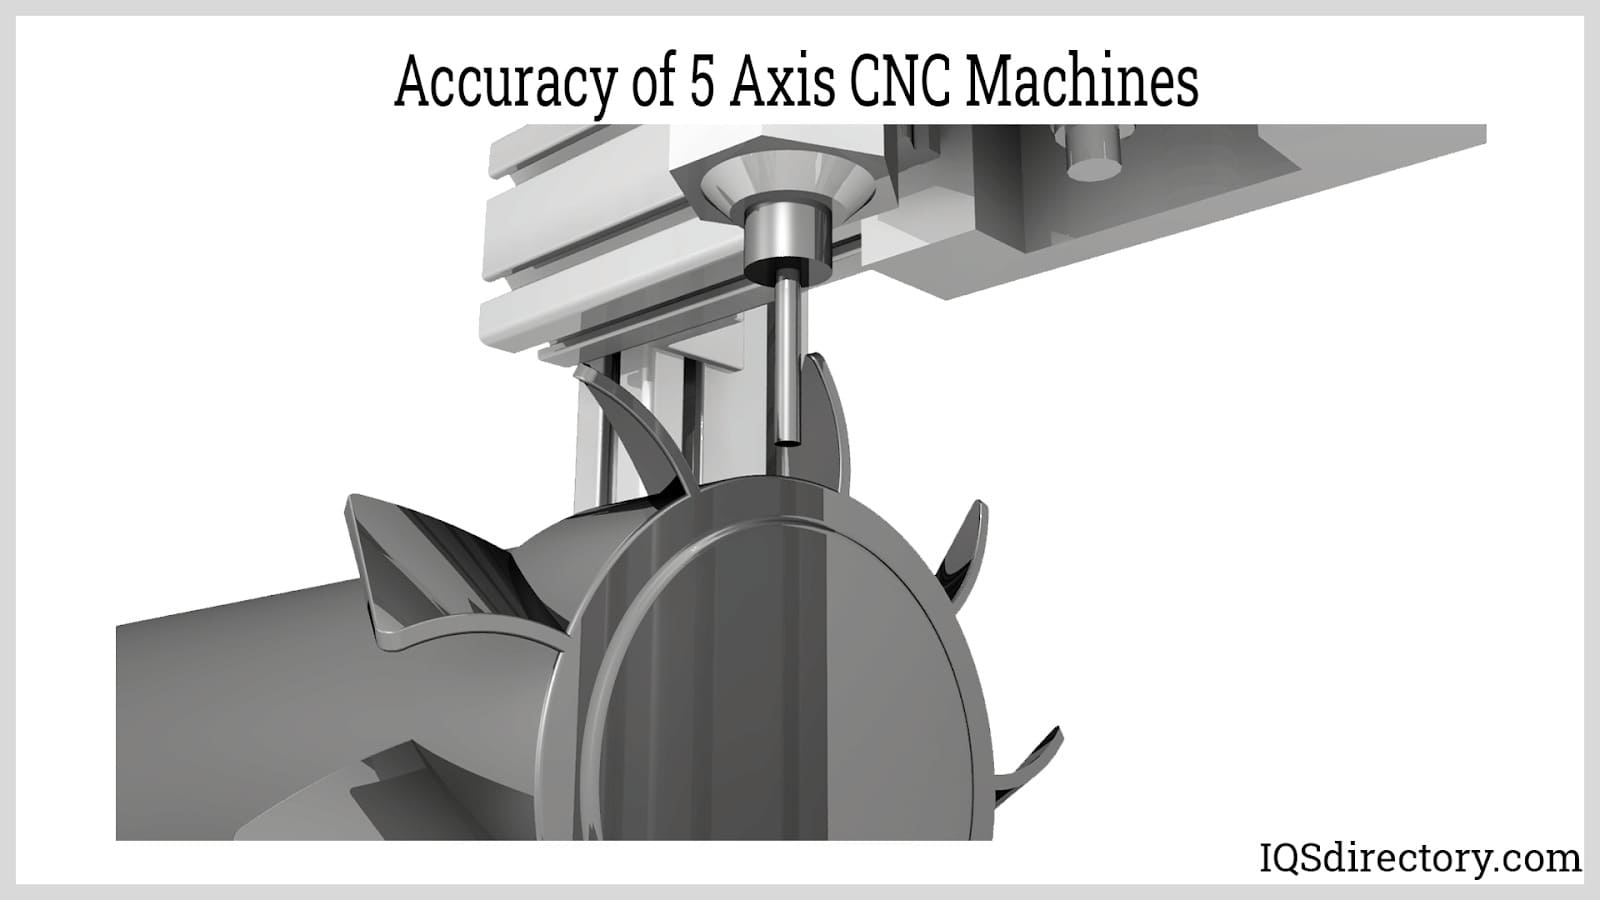 Accuracy of 5 Axis CNC Machines